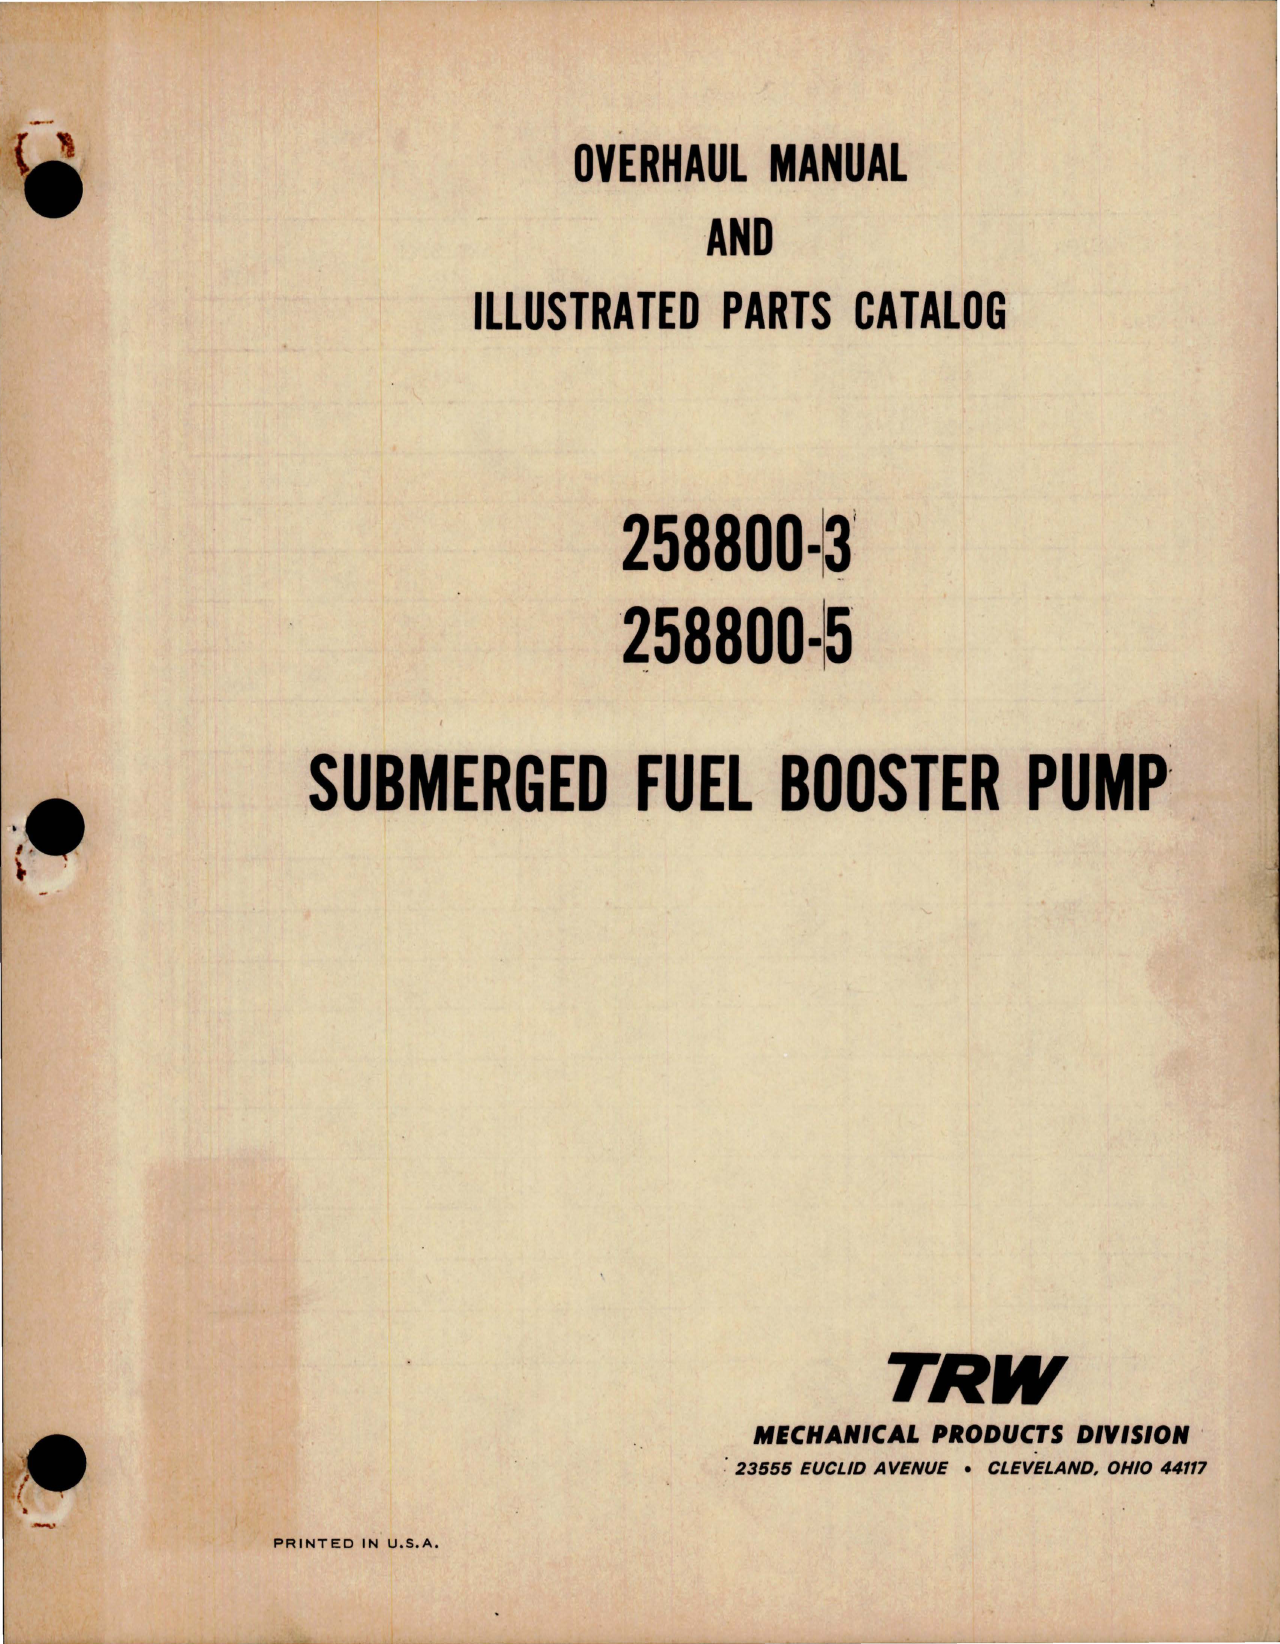 Sample page 1 from AirCorps Library document: Overhaul Instructions w Parts Catalog for Submerged Fuel Booster Pump - 258800-3 and 258800-5